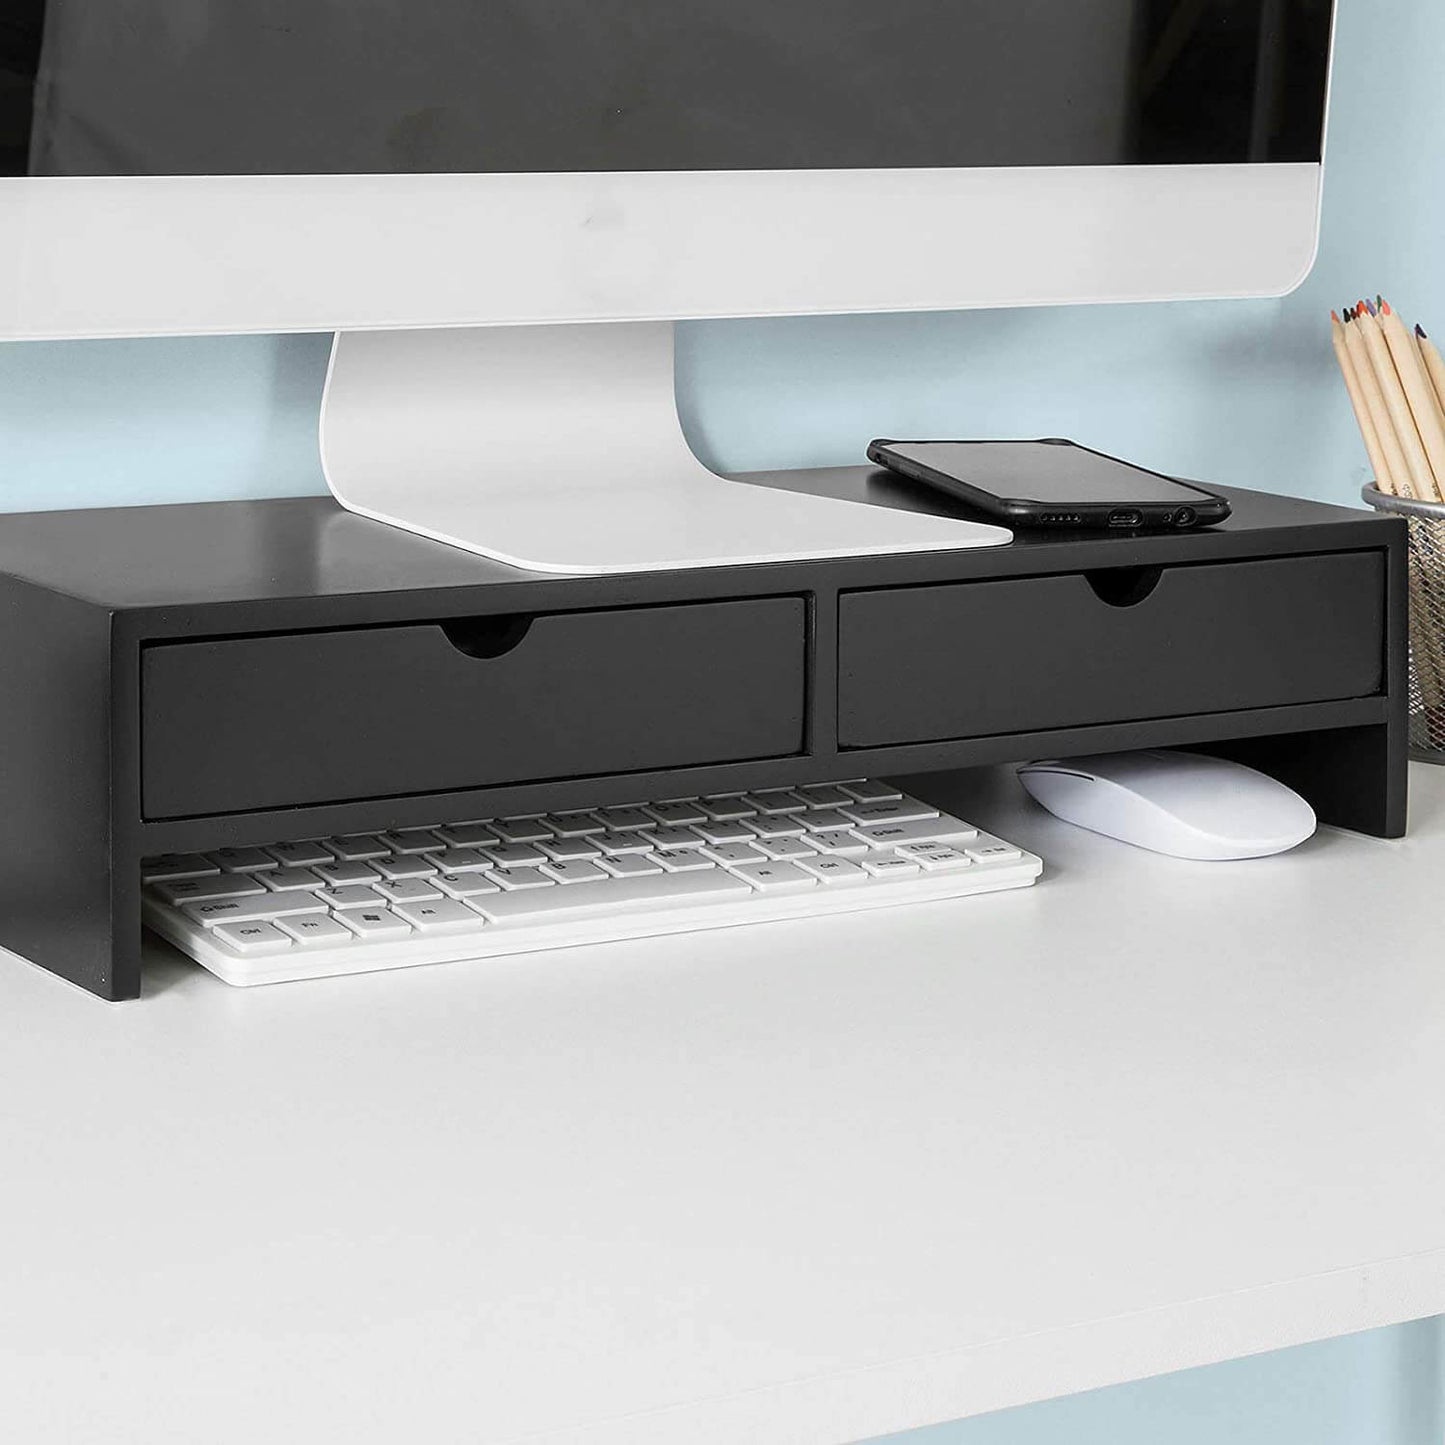 HIGHLANDS Black Monitor Stand and Desk Organiser with 2 Drawers